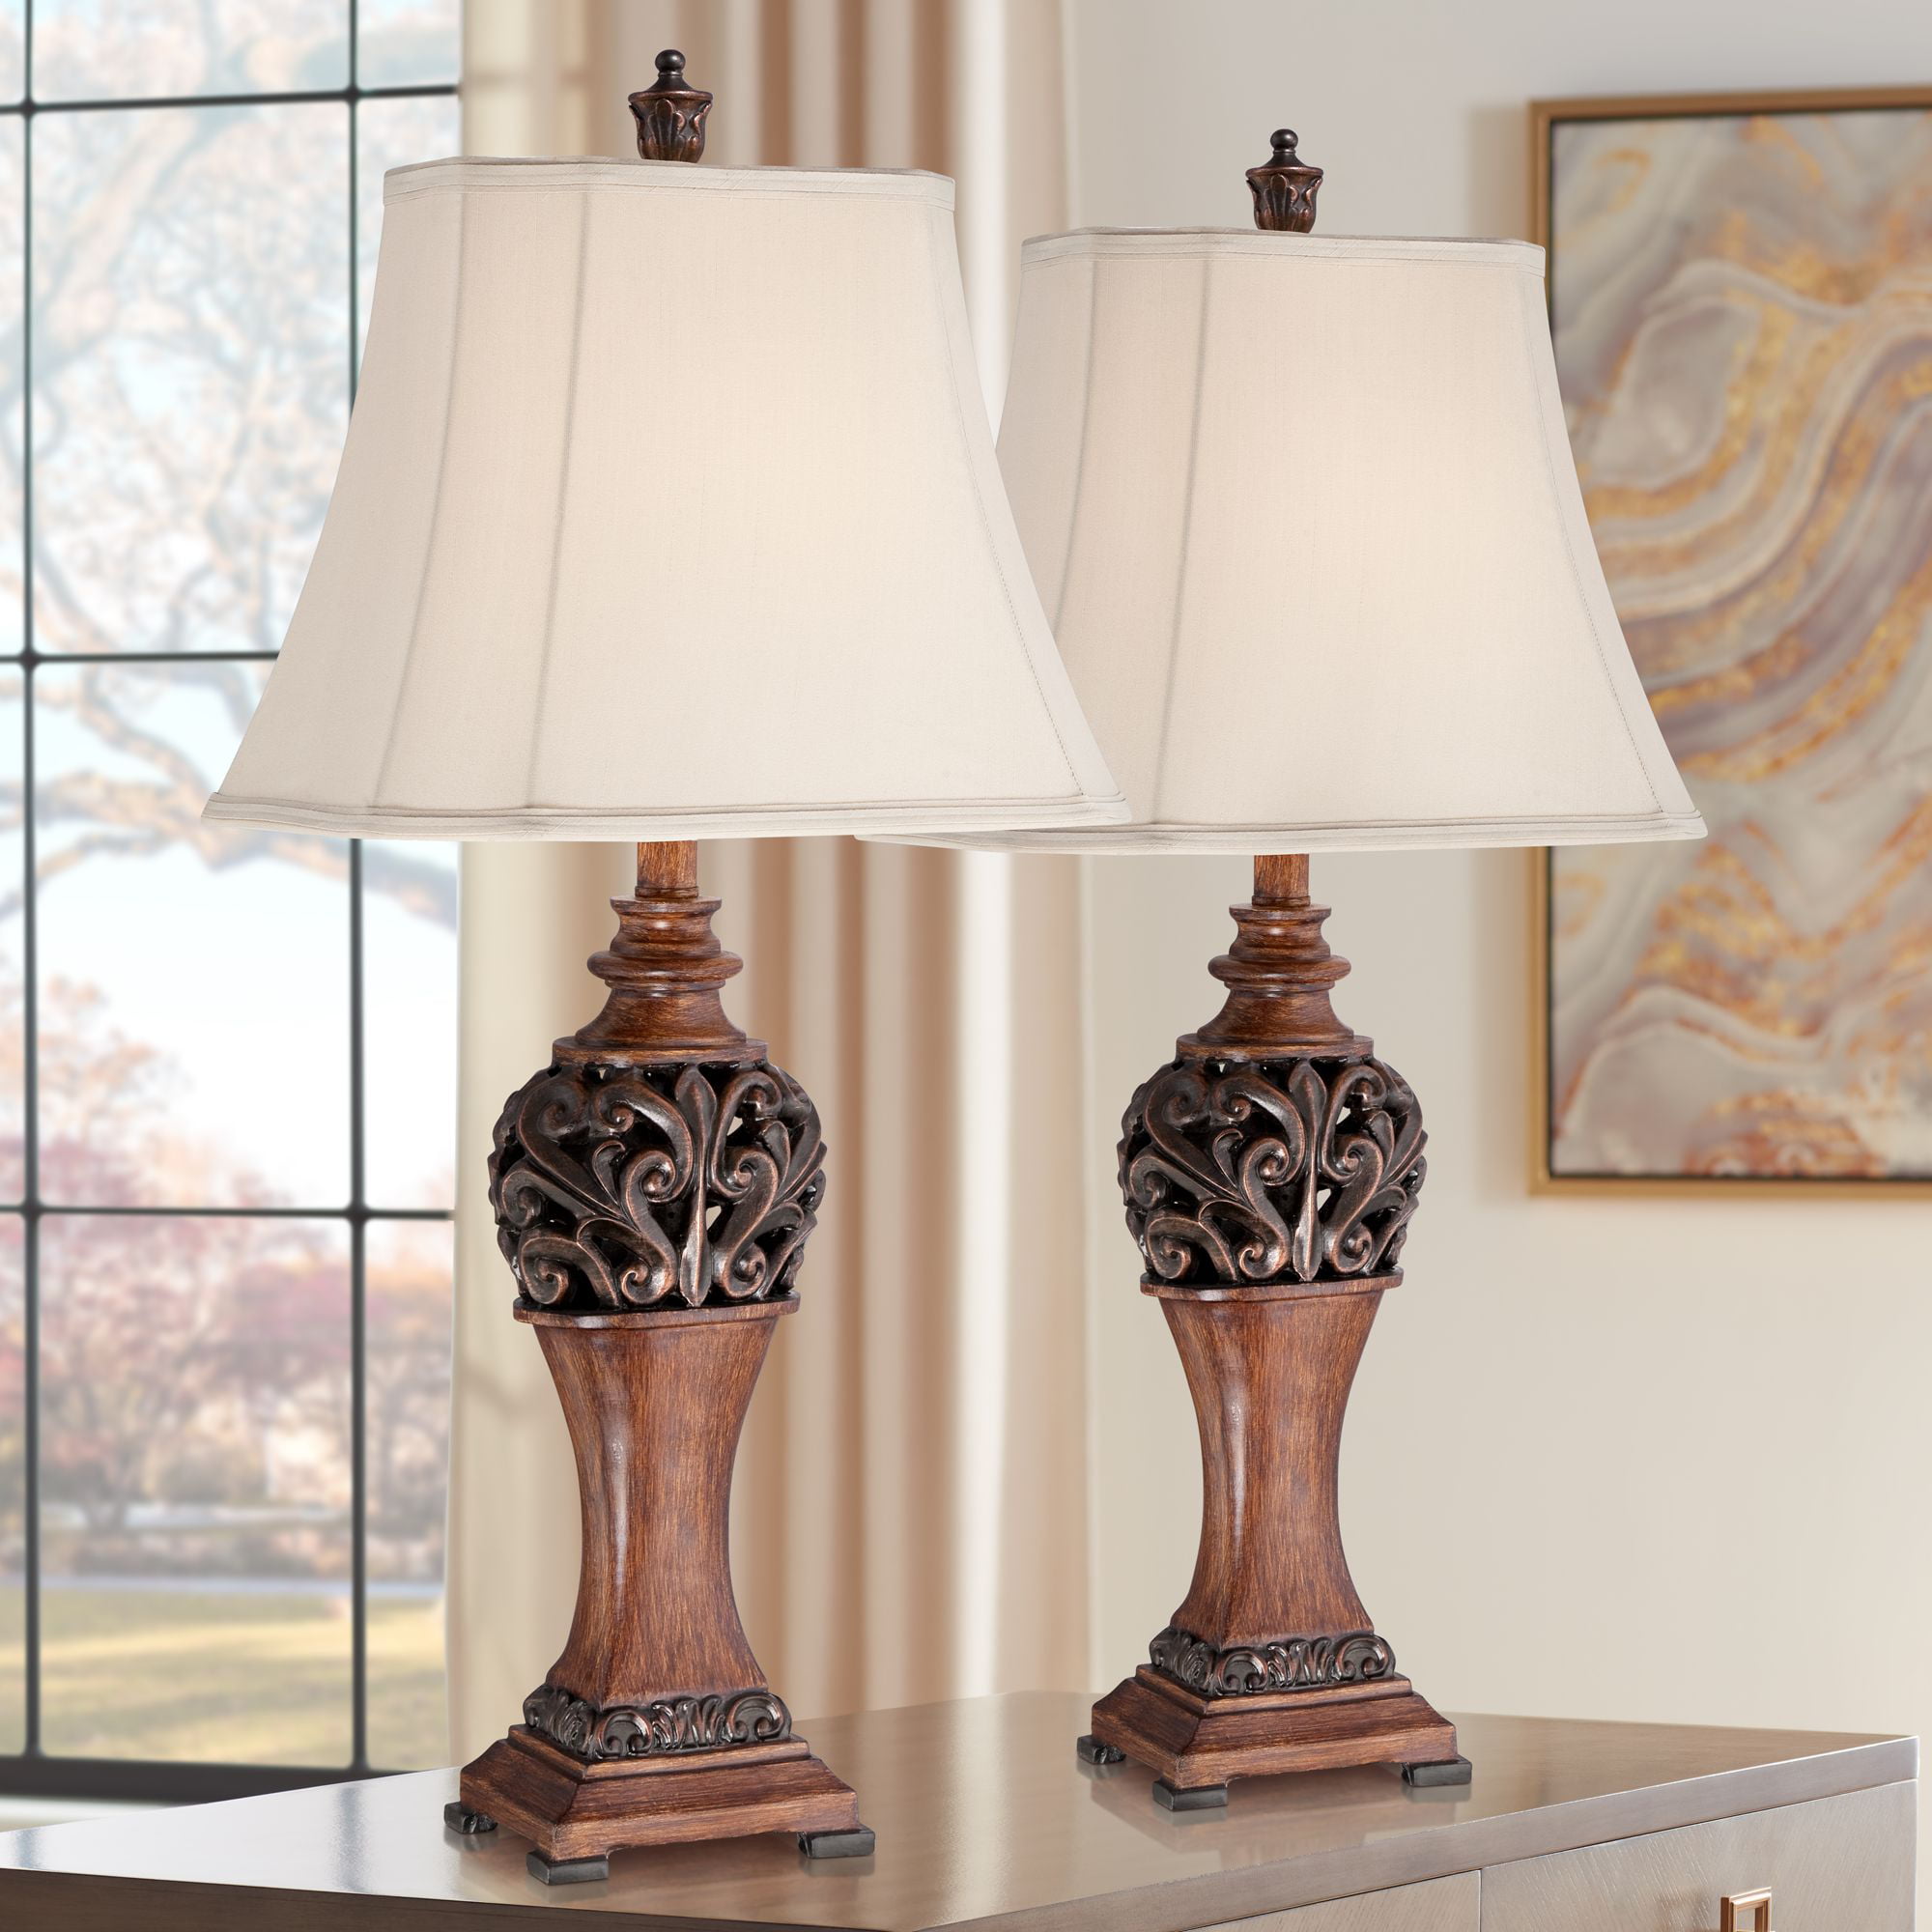 Regency Hill Traditional Table Lamps, Vintage Wooden Carved Table Lamp Shade